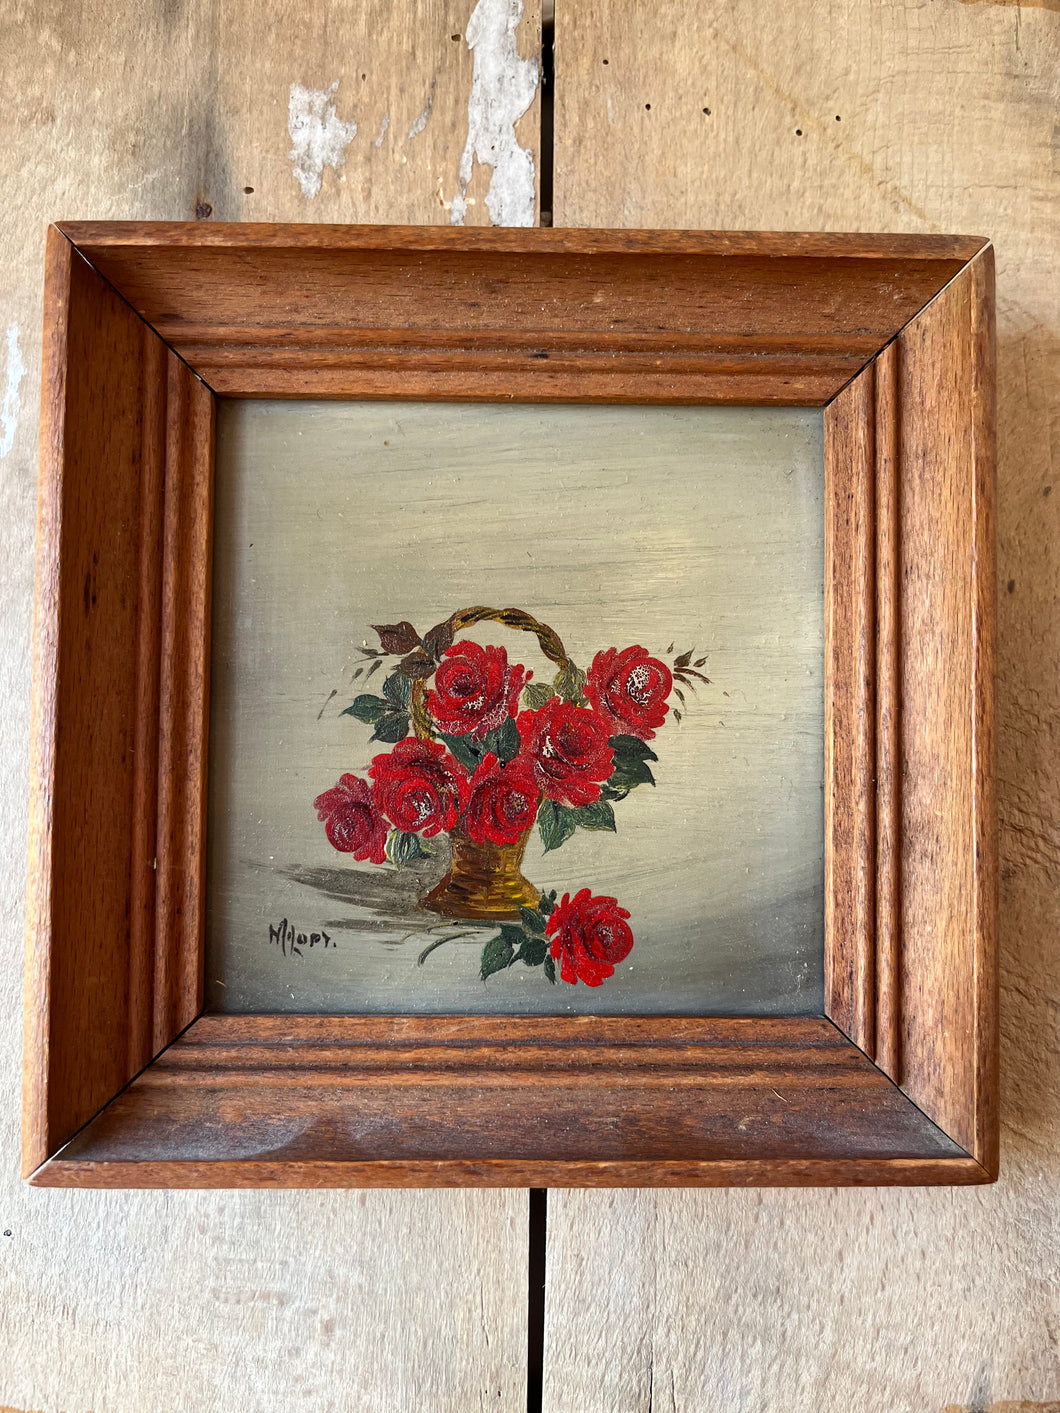 Vintage Miniature framed oil painting, Red